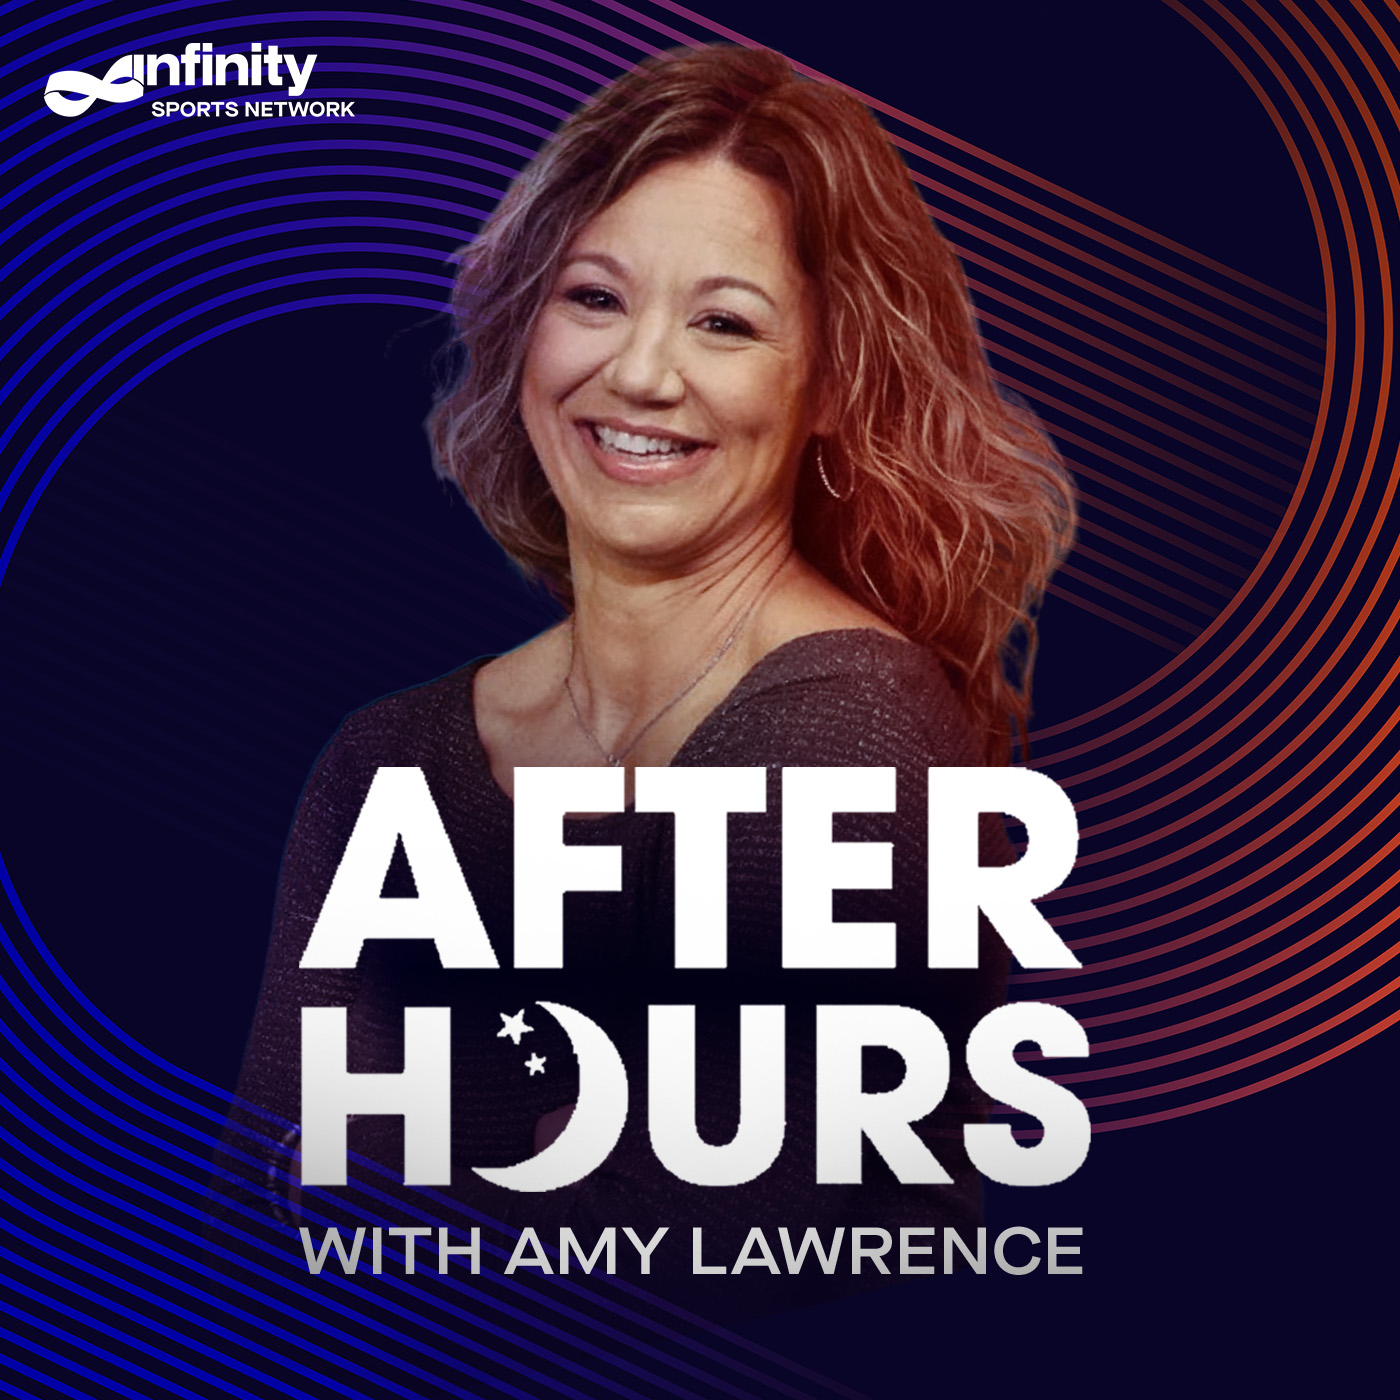 2-4-22 After Hours with Amy Lawrence PODCAST: Hour 1